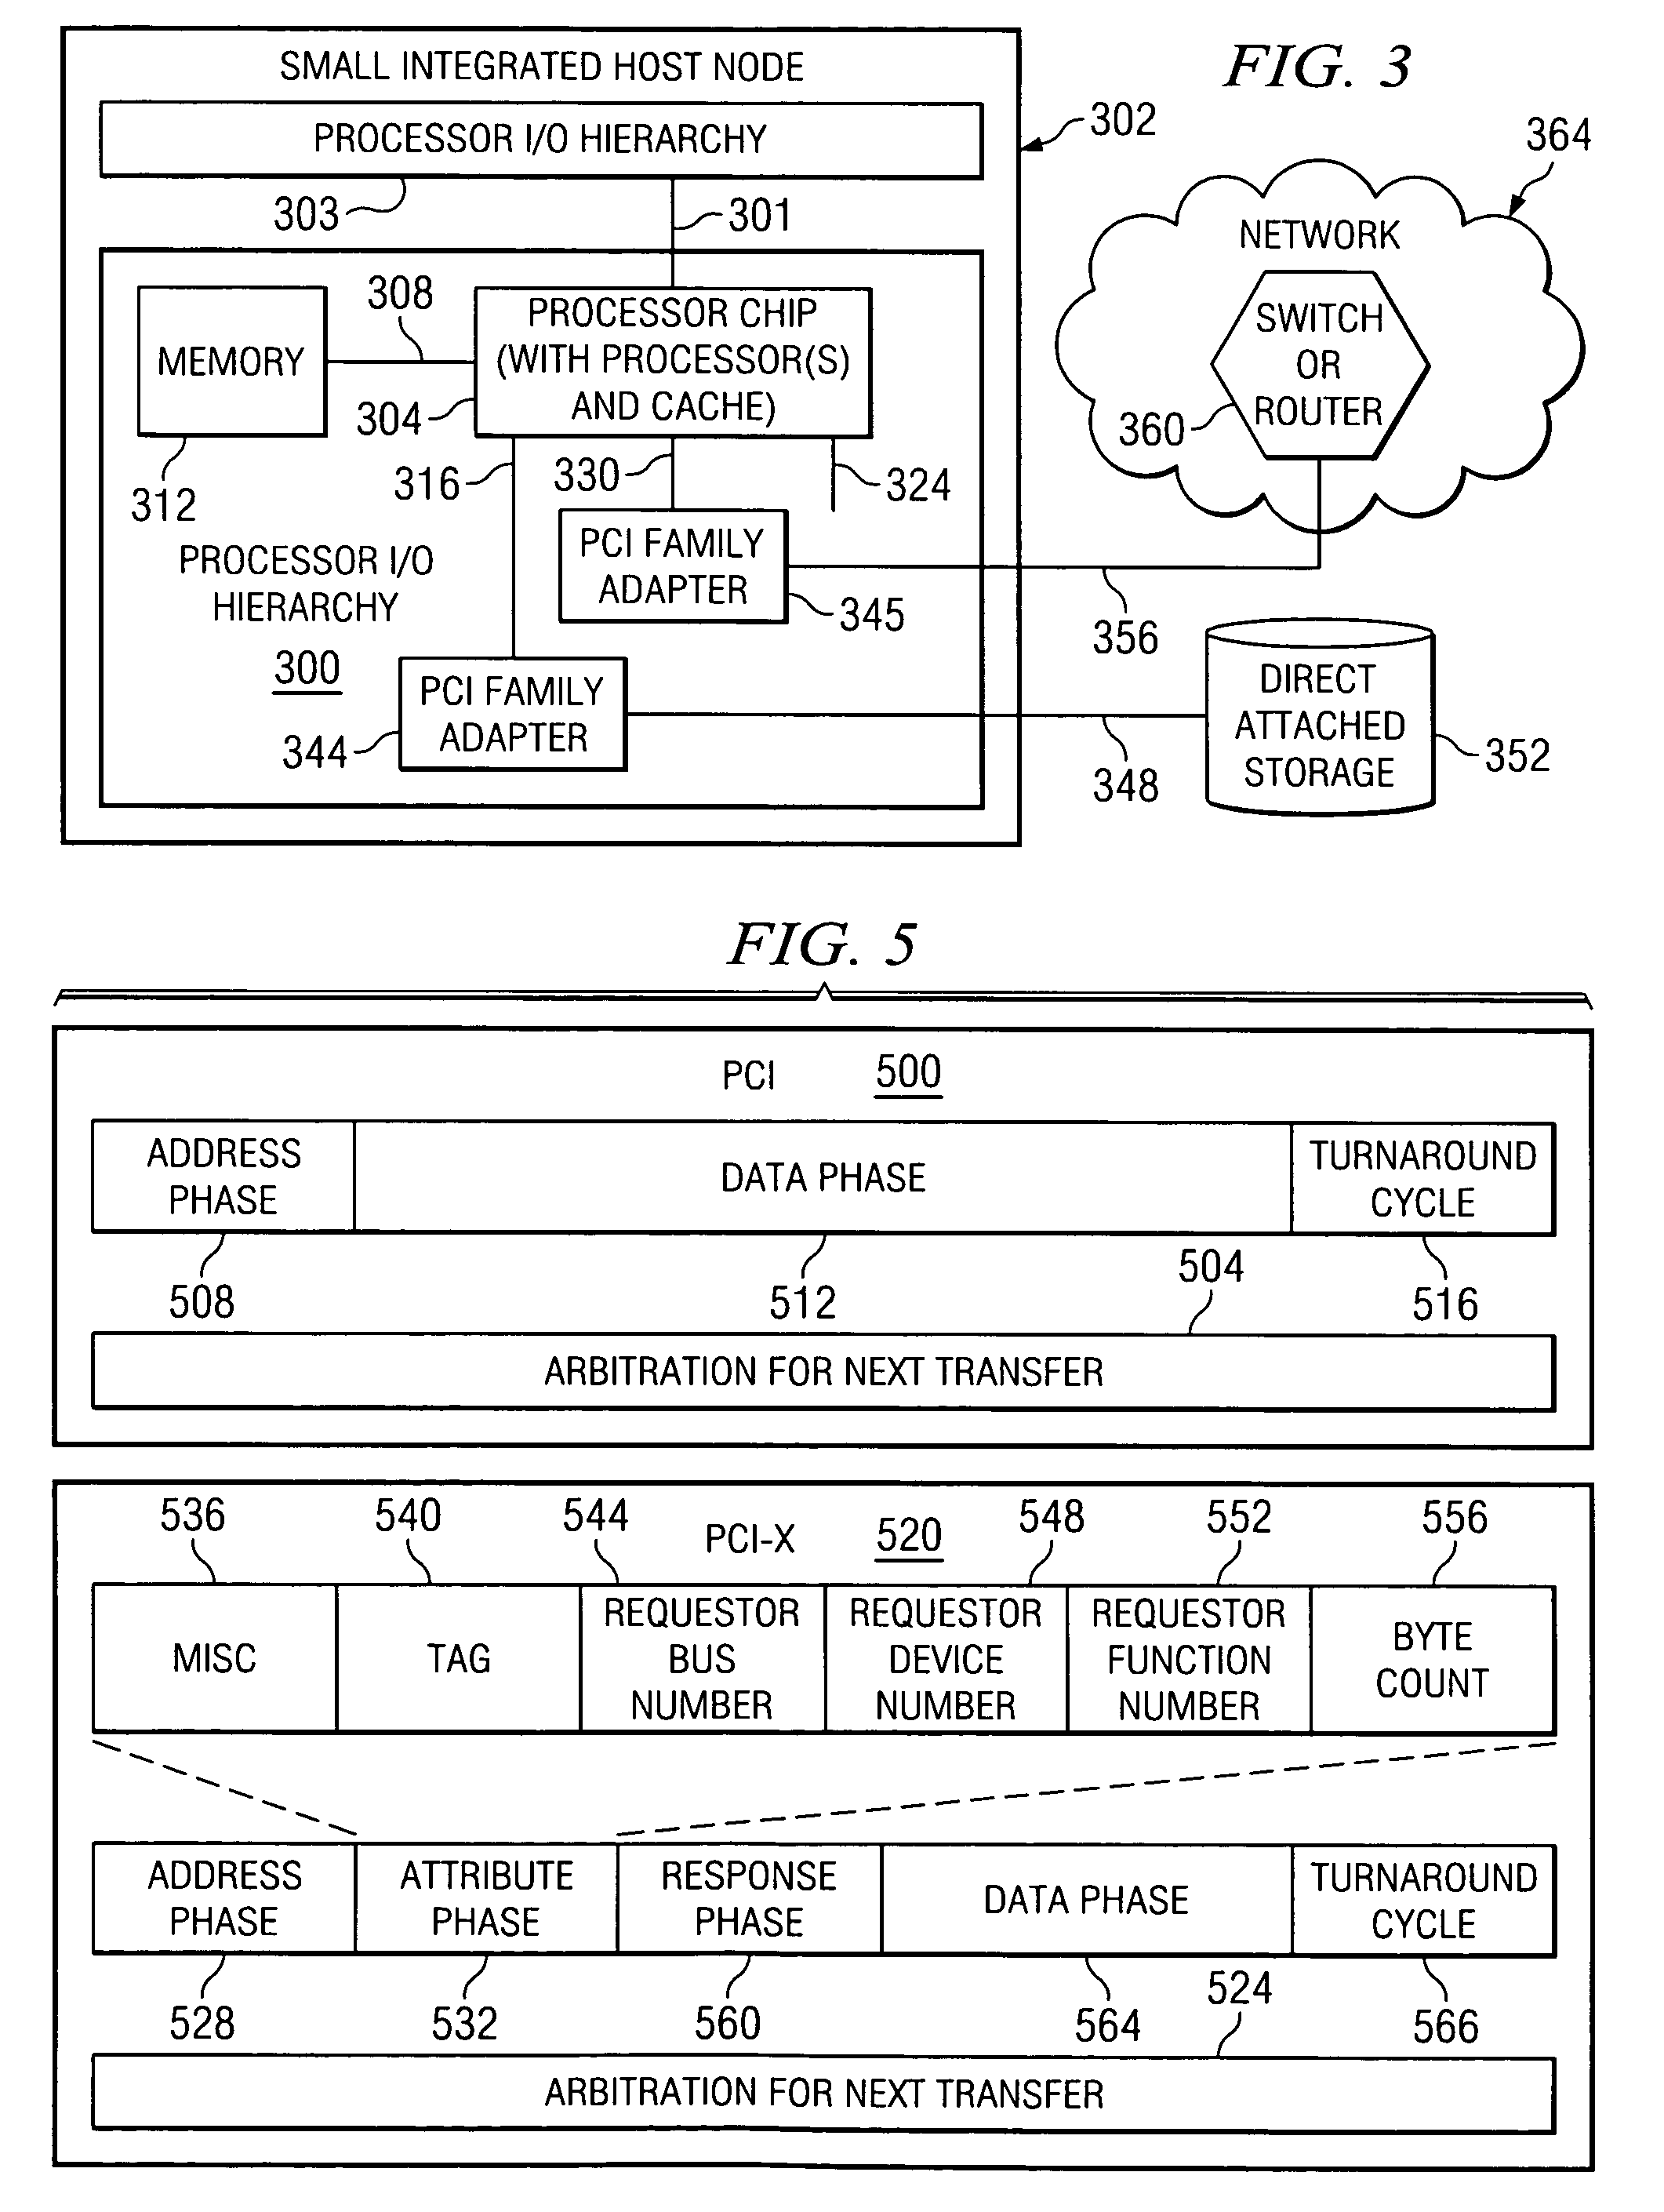 Association of host translations that are associated to an access control level on a PCI bridge that supports virtualization